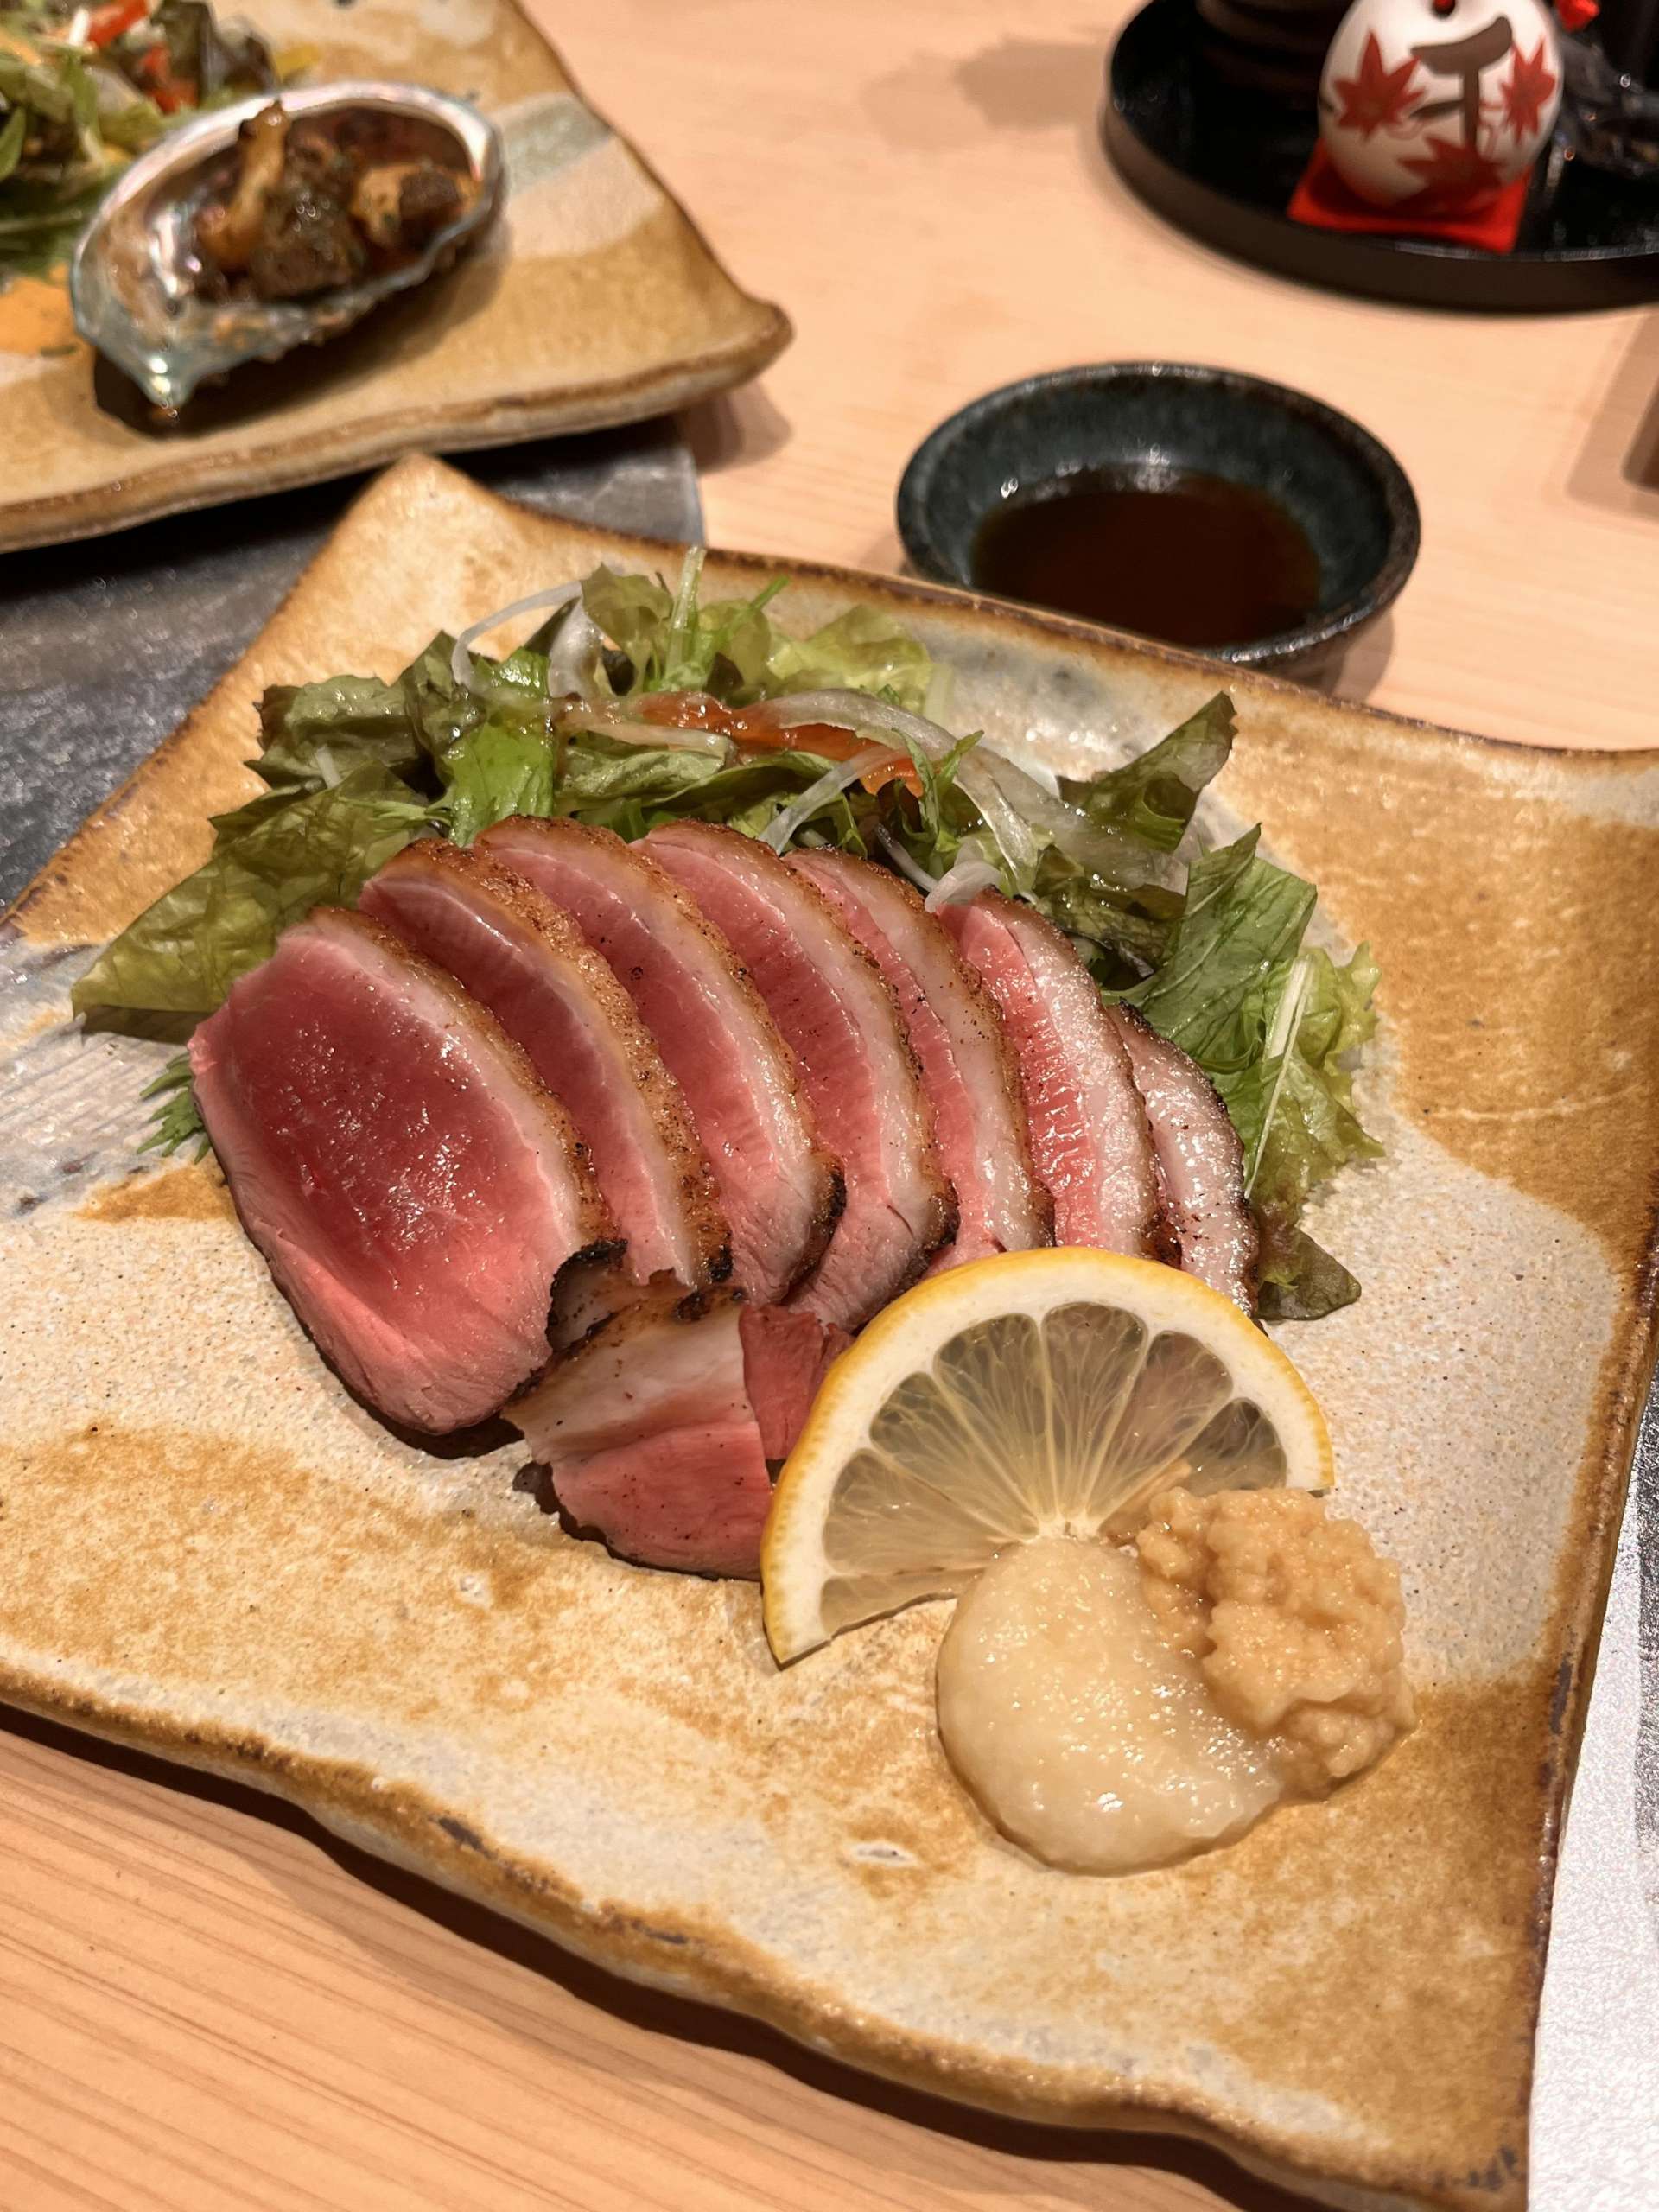 The cuisine features seasonal ingredients sourced from Osaka, varying with each season.